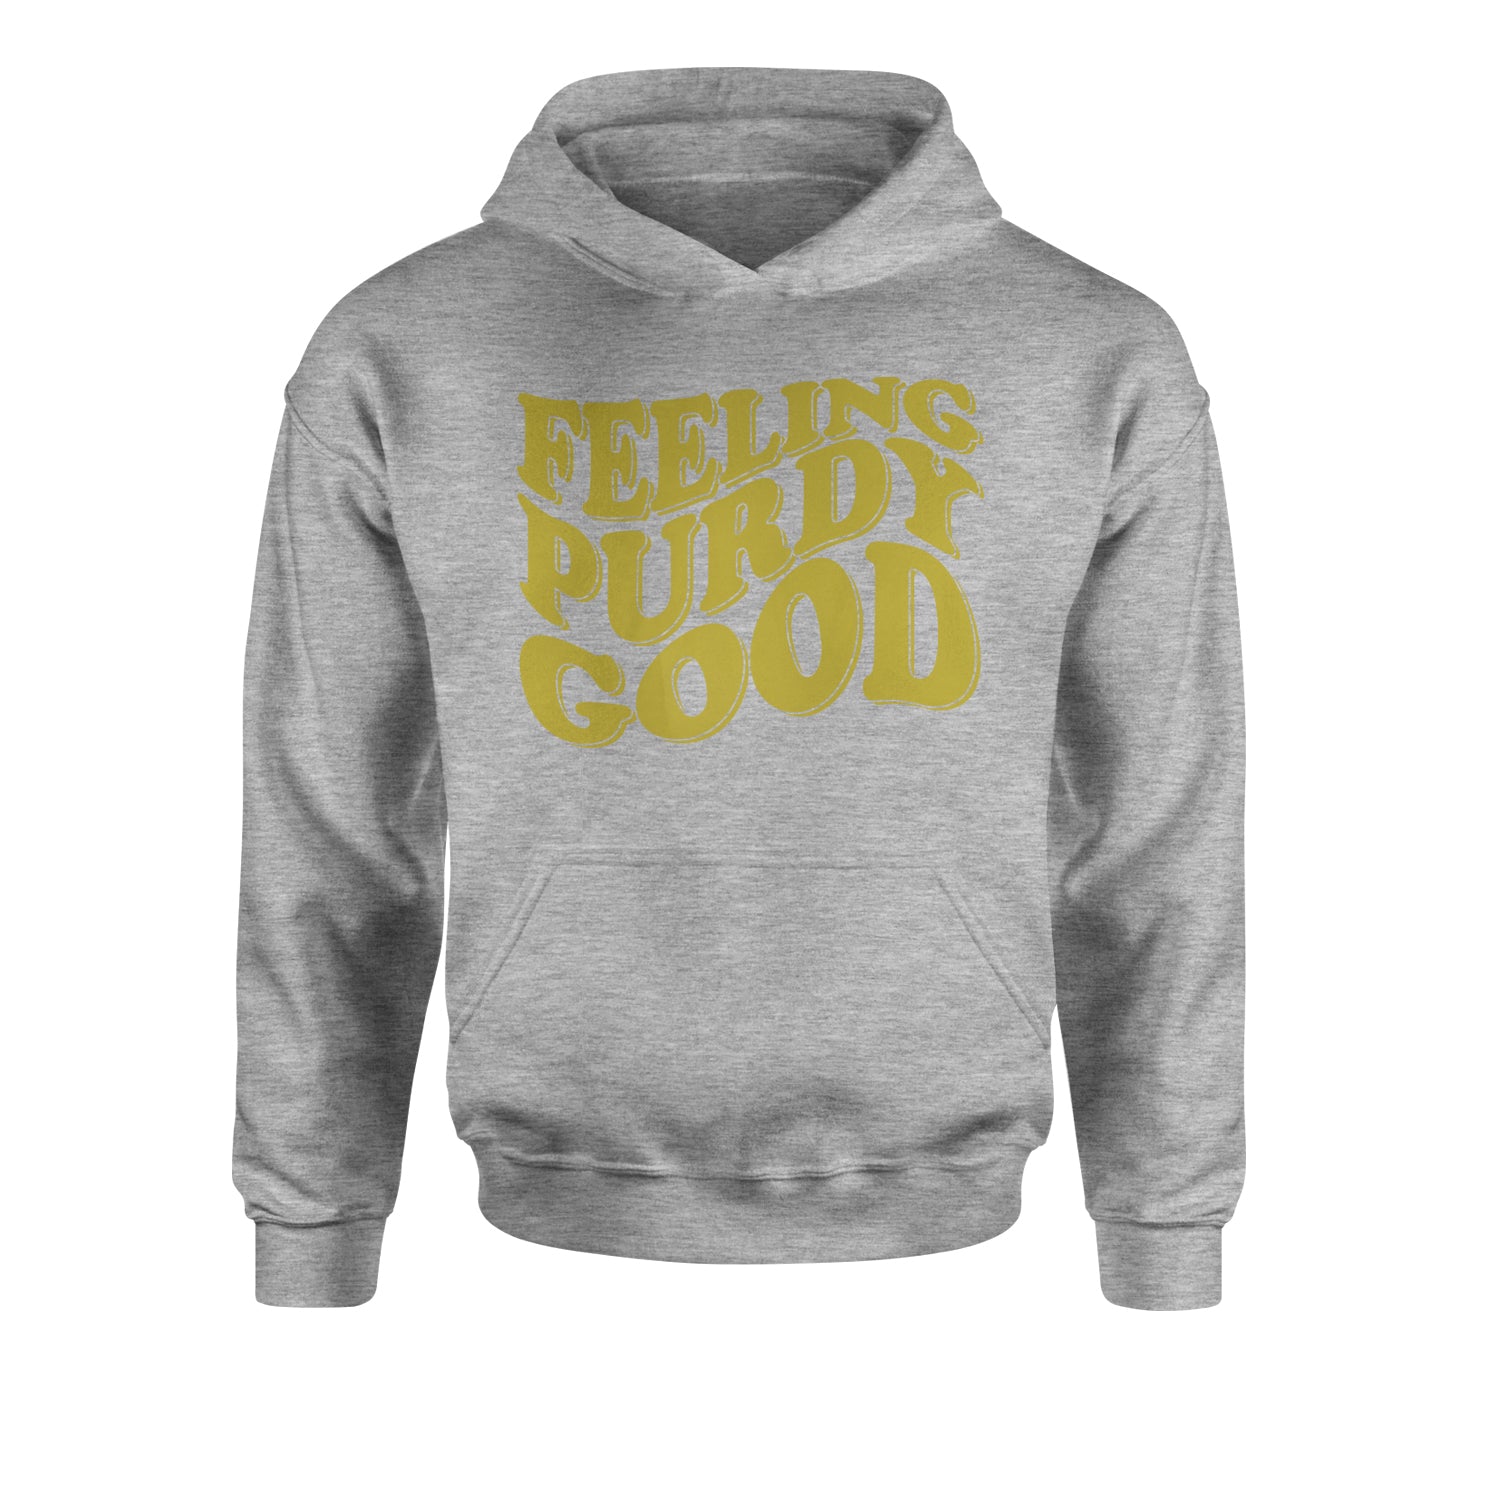 Feeling Purdy Good Youth-Sized Hoodie 13, football by Expression Tees